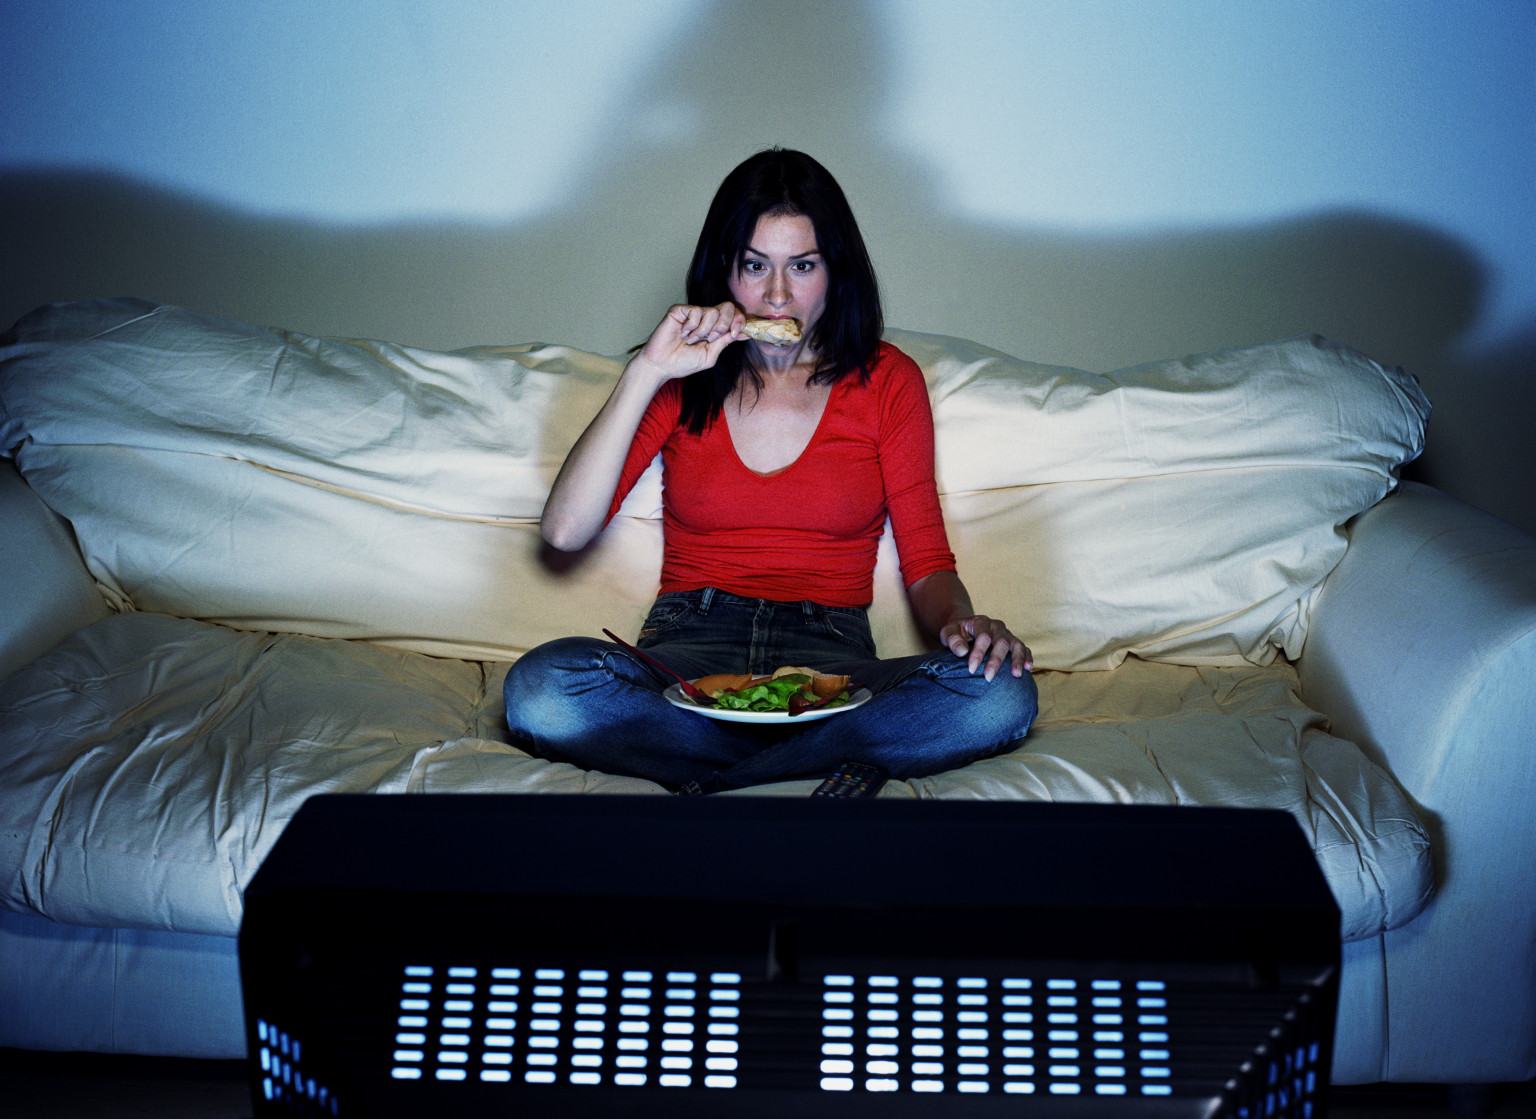 woman eating and watching television